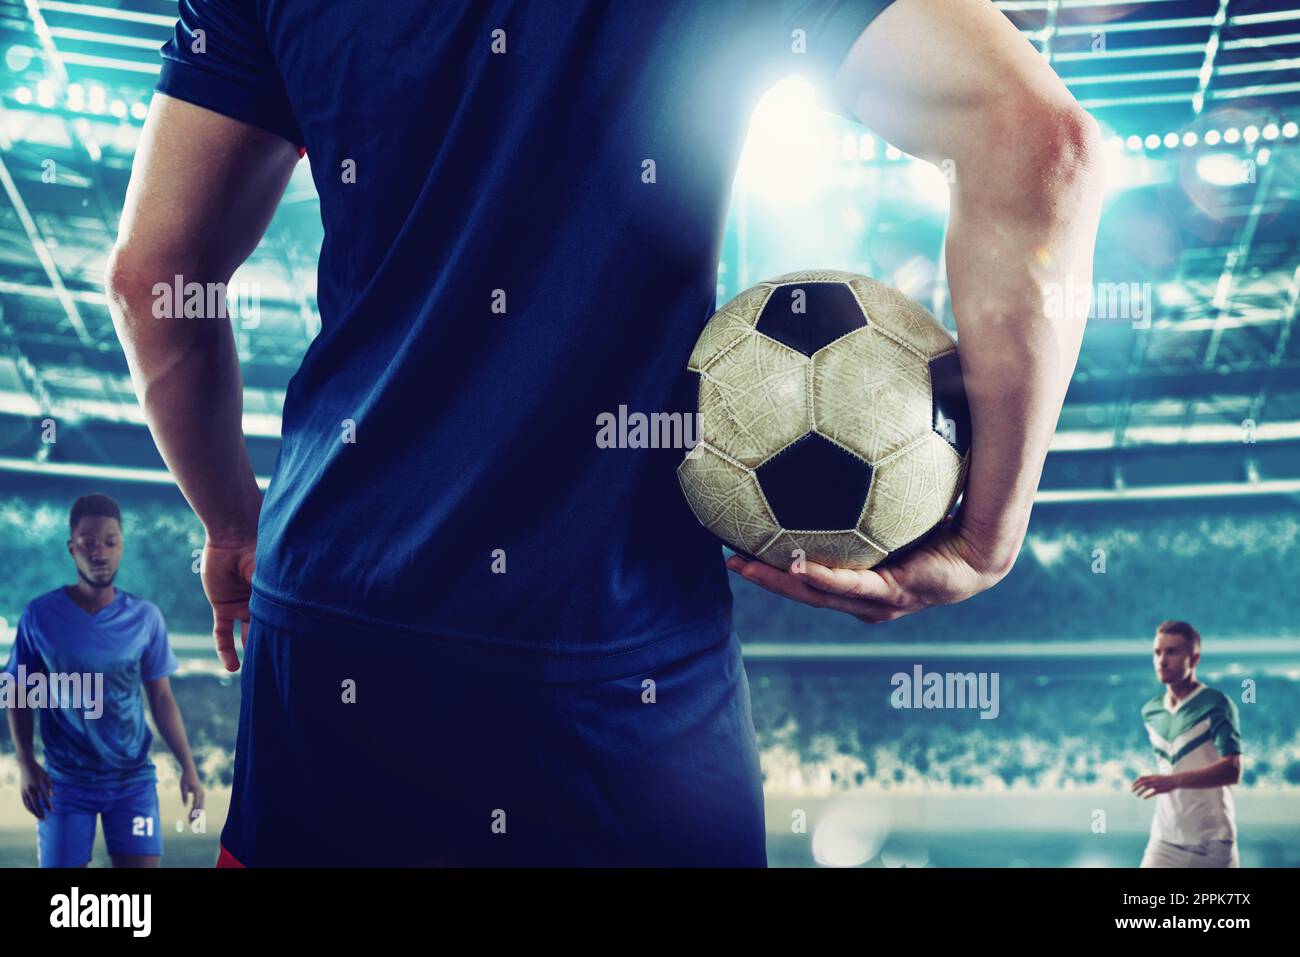 Football player with to play with soccerball against opposing team Stock Photo